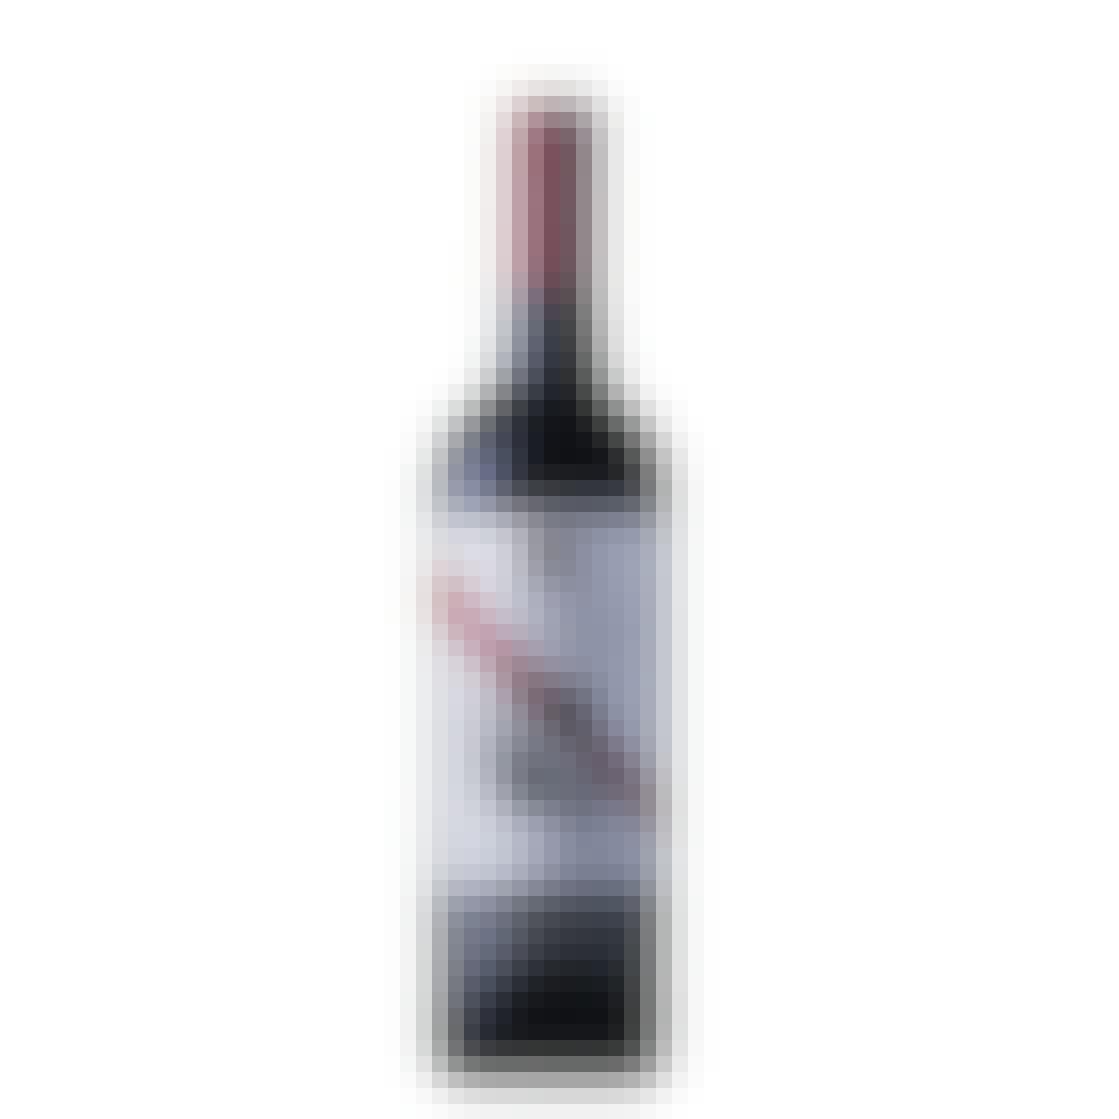 d'Arenberg The Laughing Magpie Shiraz Viognier 2017 750ml